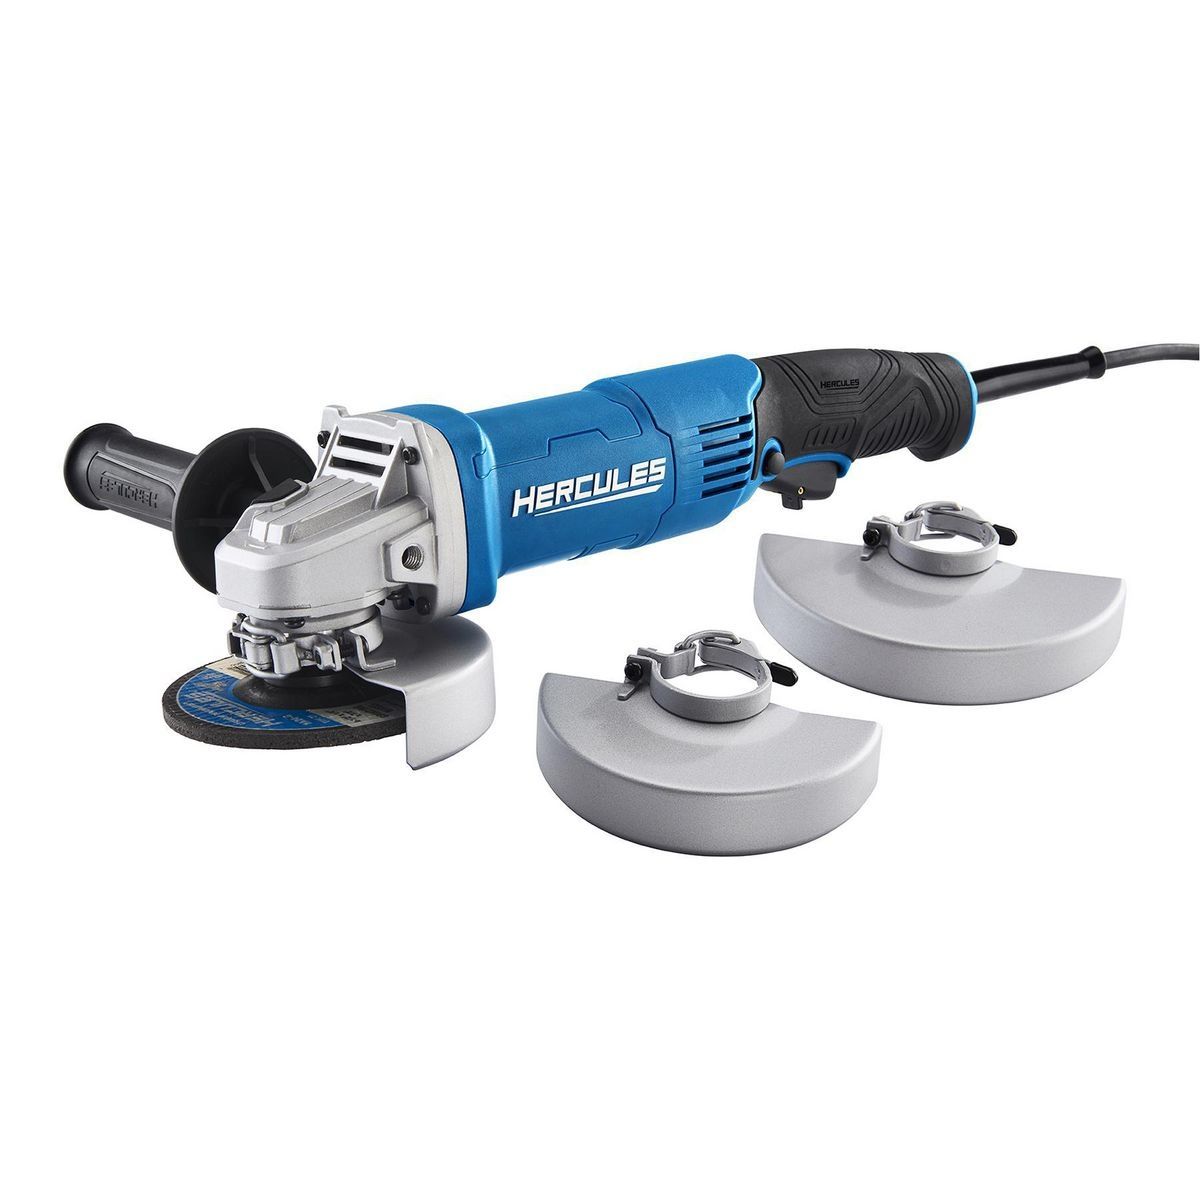 HERCULES 13 Amp 4-1/2 in. to 6 in. Trigger Grip Angle Grinder